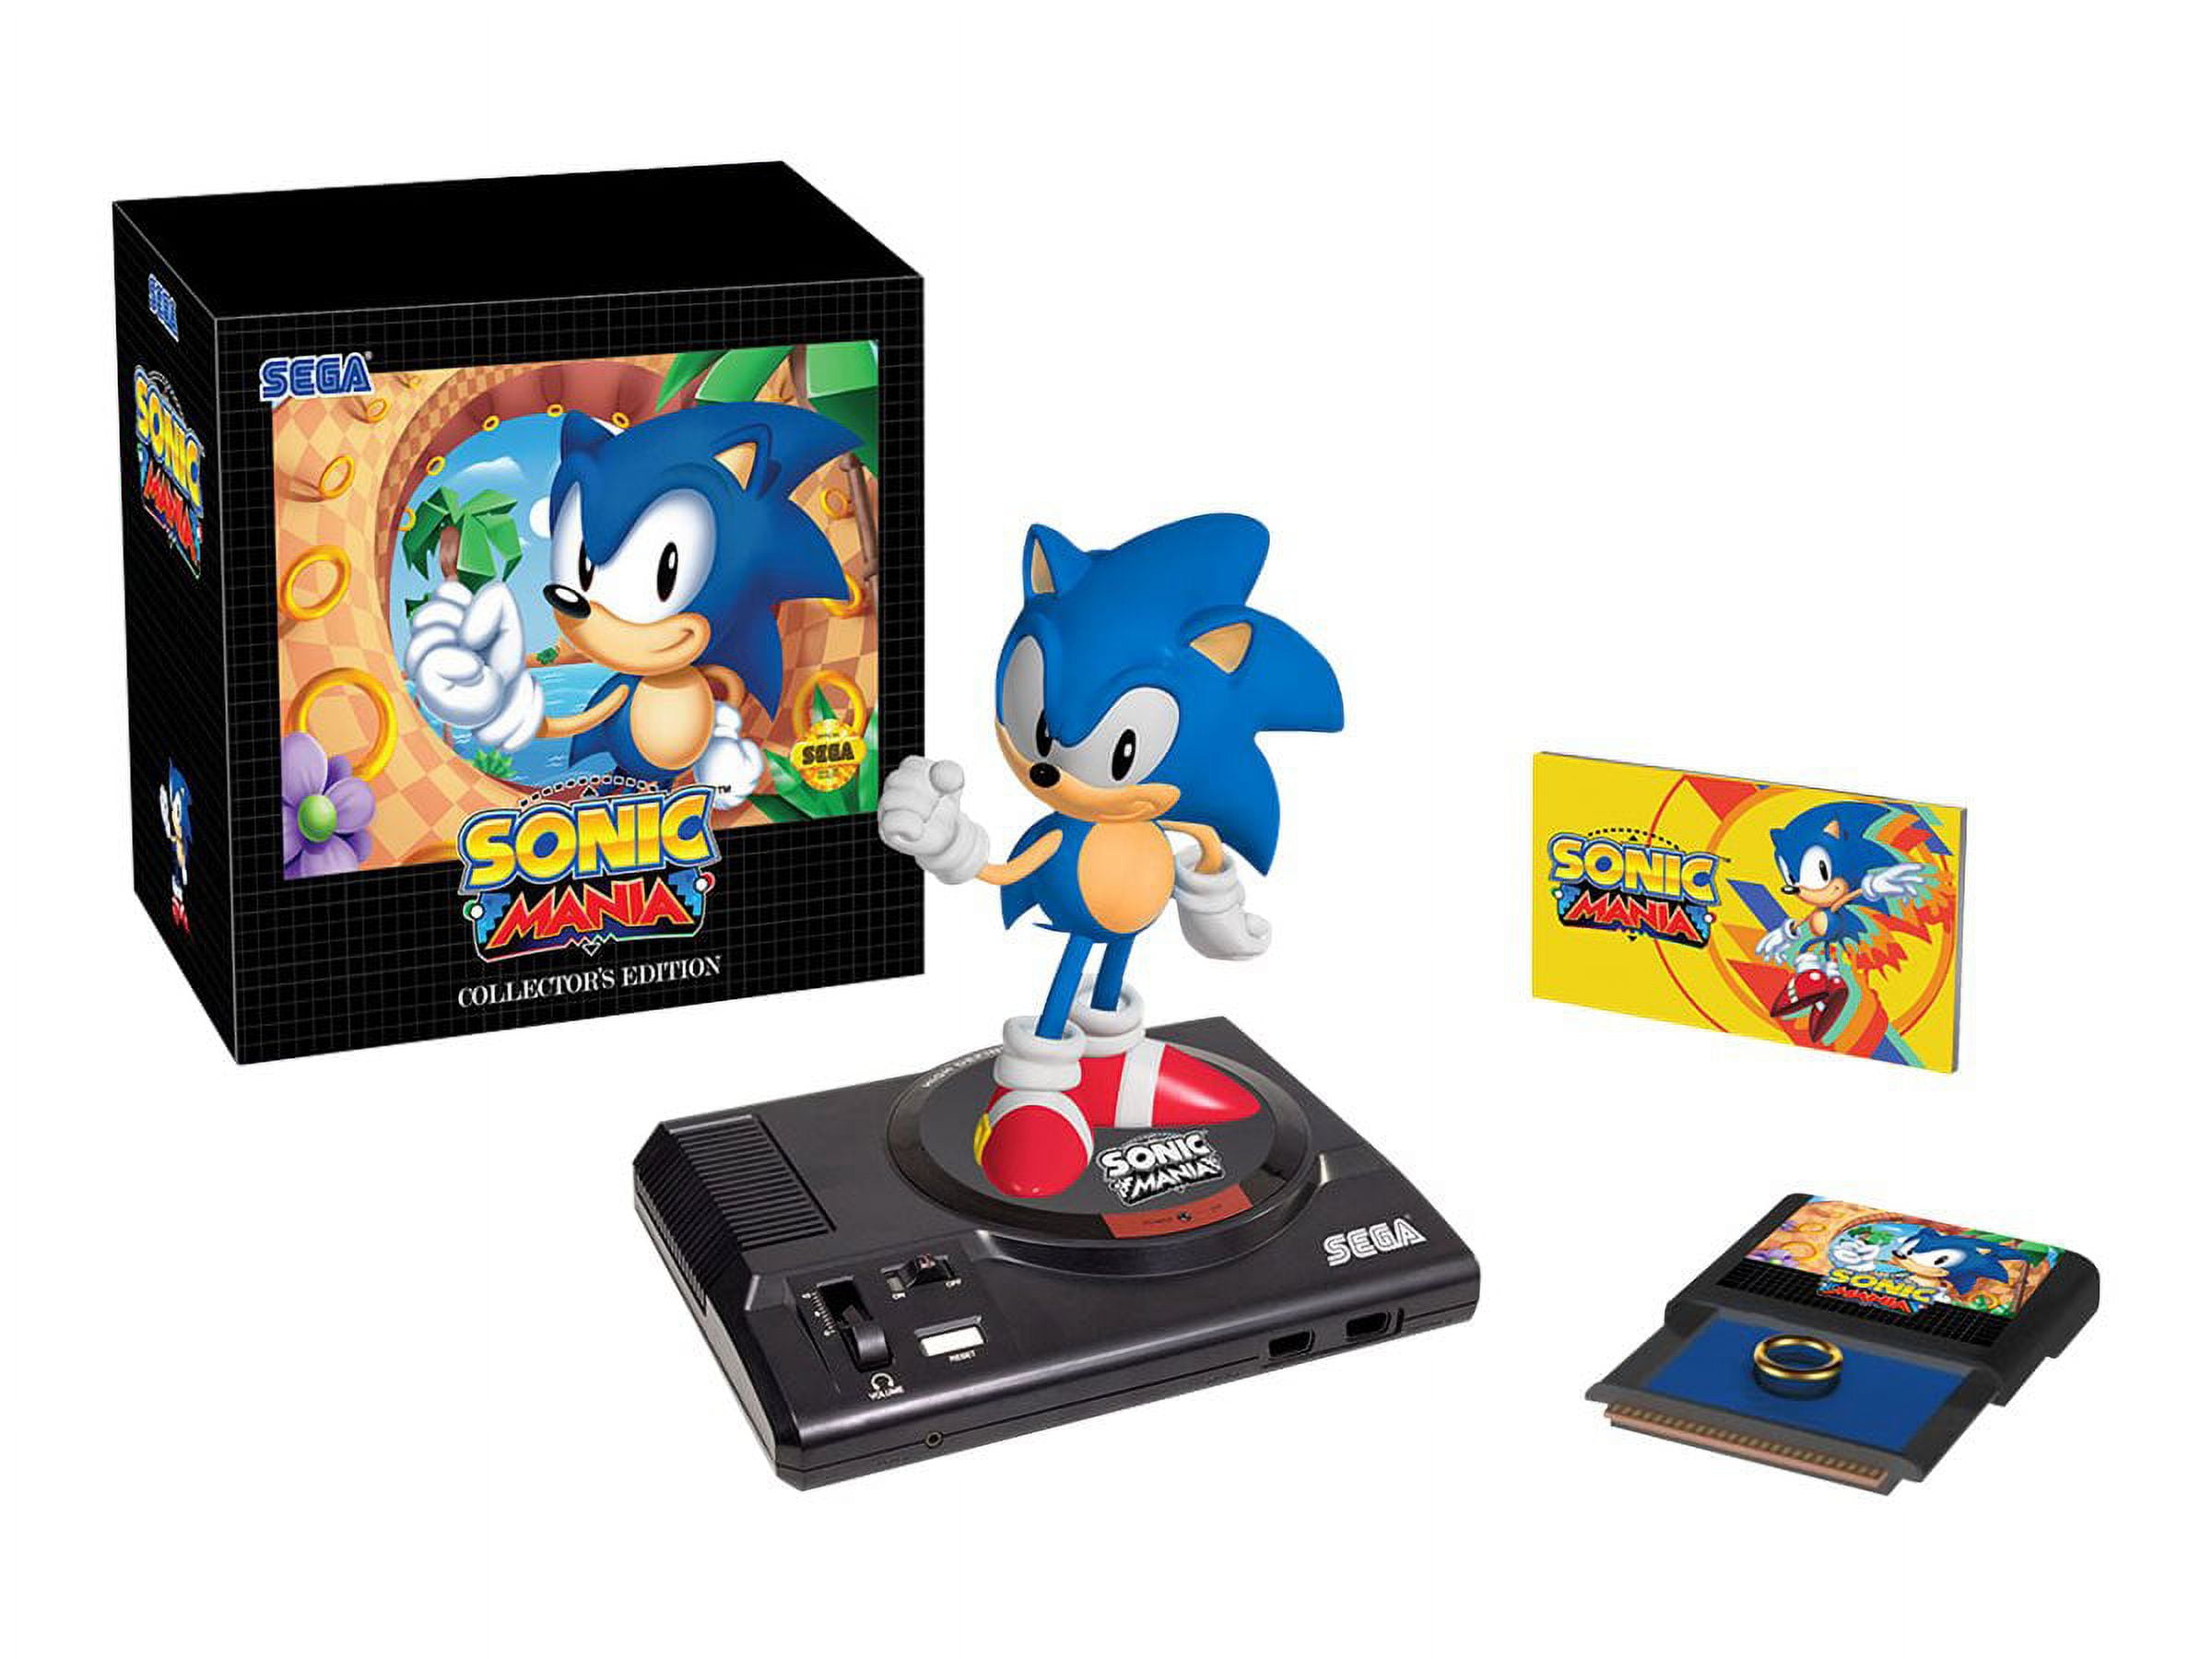 Sonic Mania: Collector's Edition for Nintendo Switch available at  Videogamesnewyork, NY